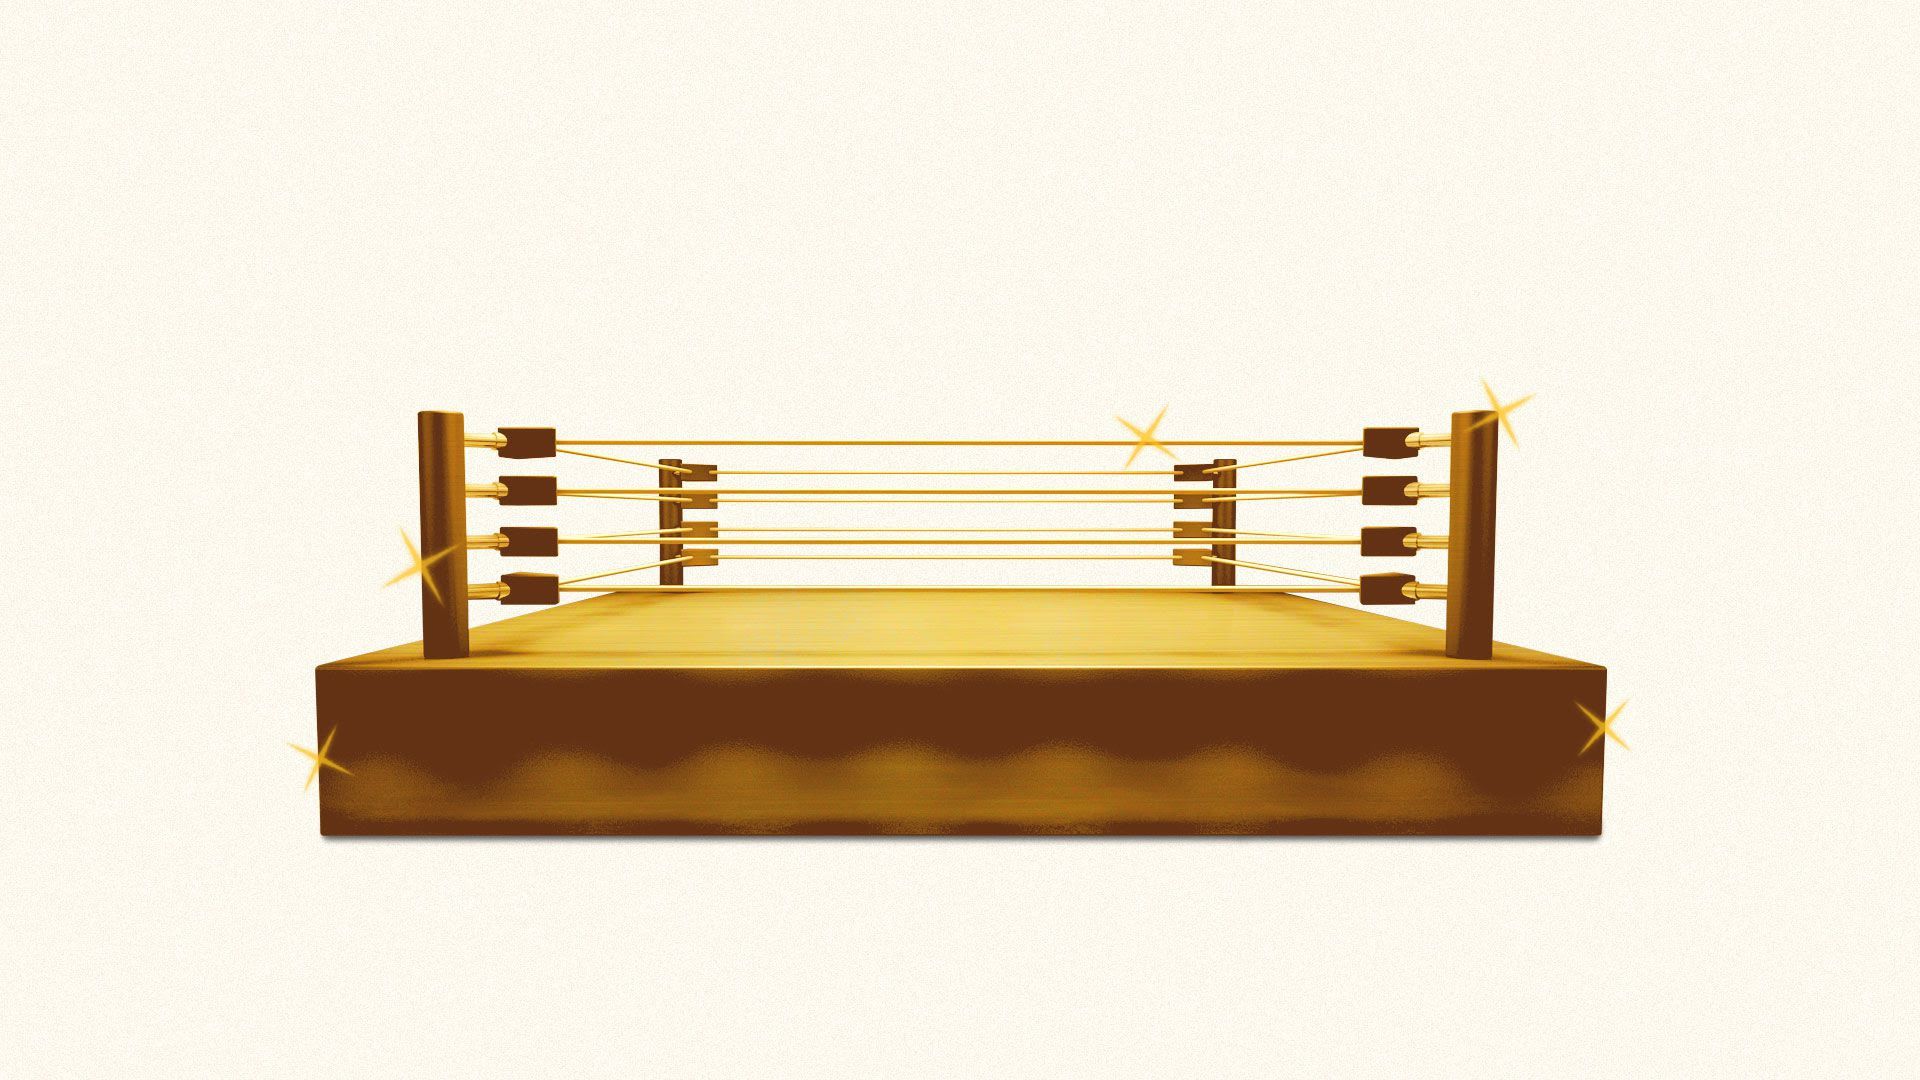 Illustration of a shiny gold boxing ring